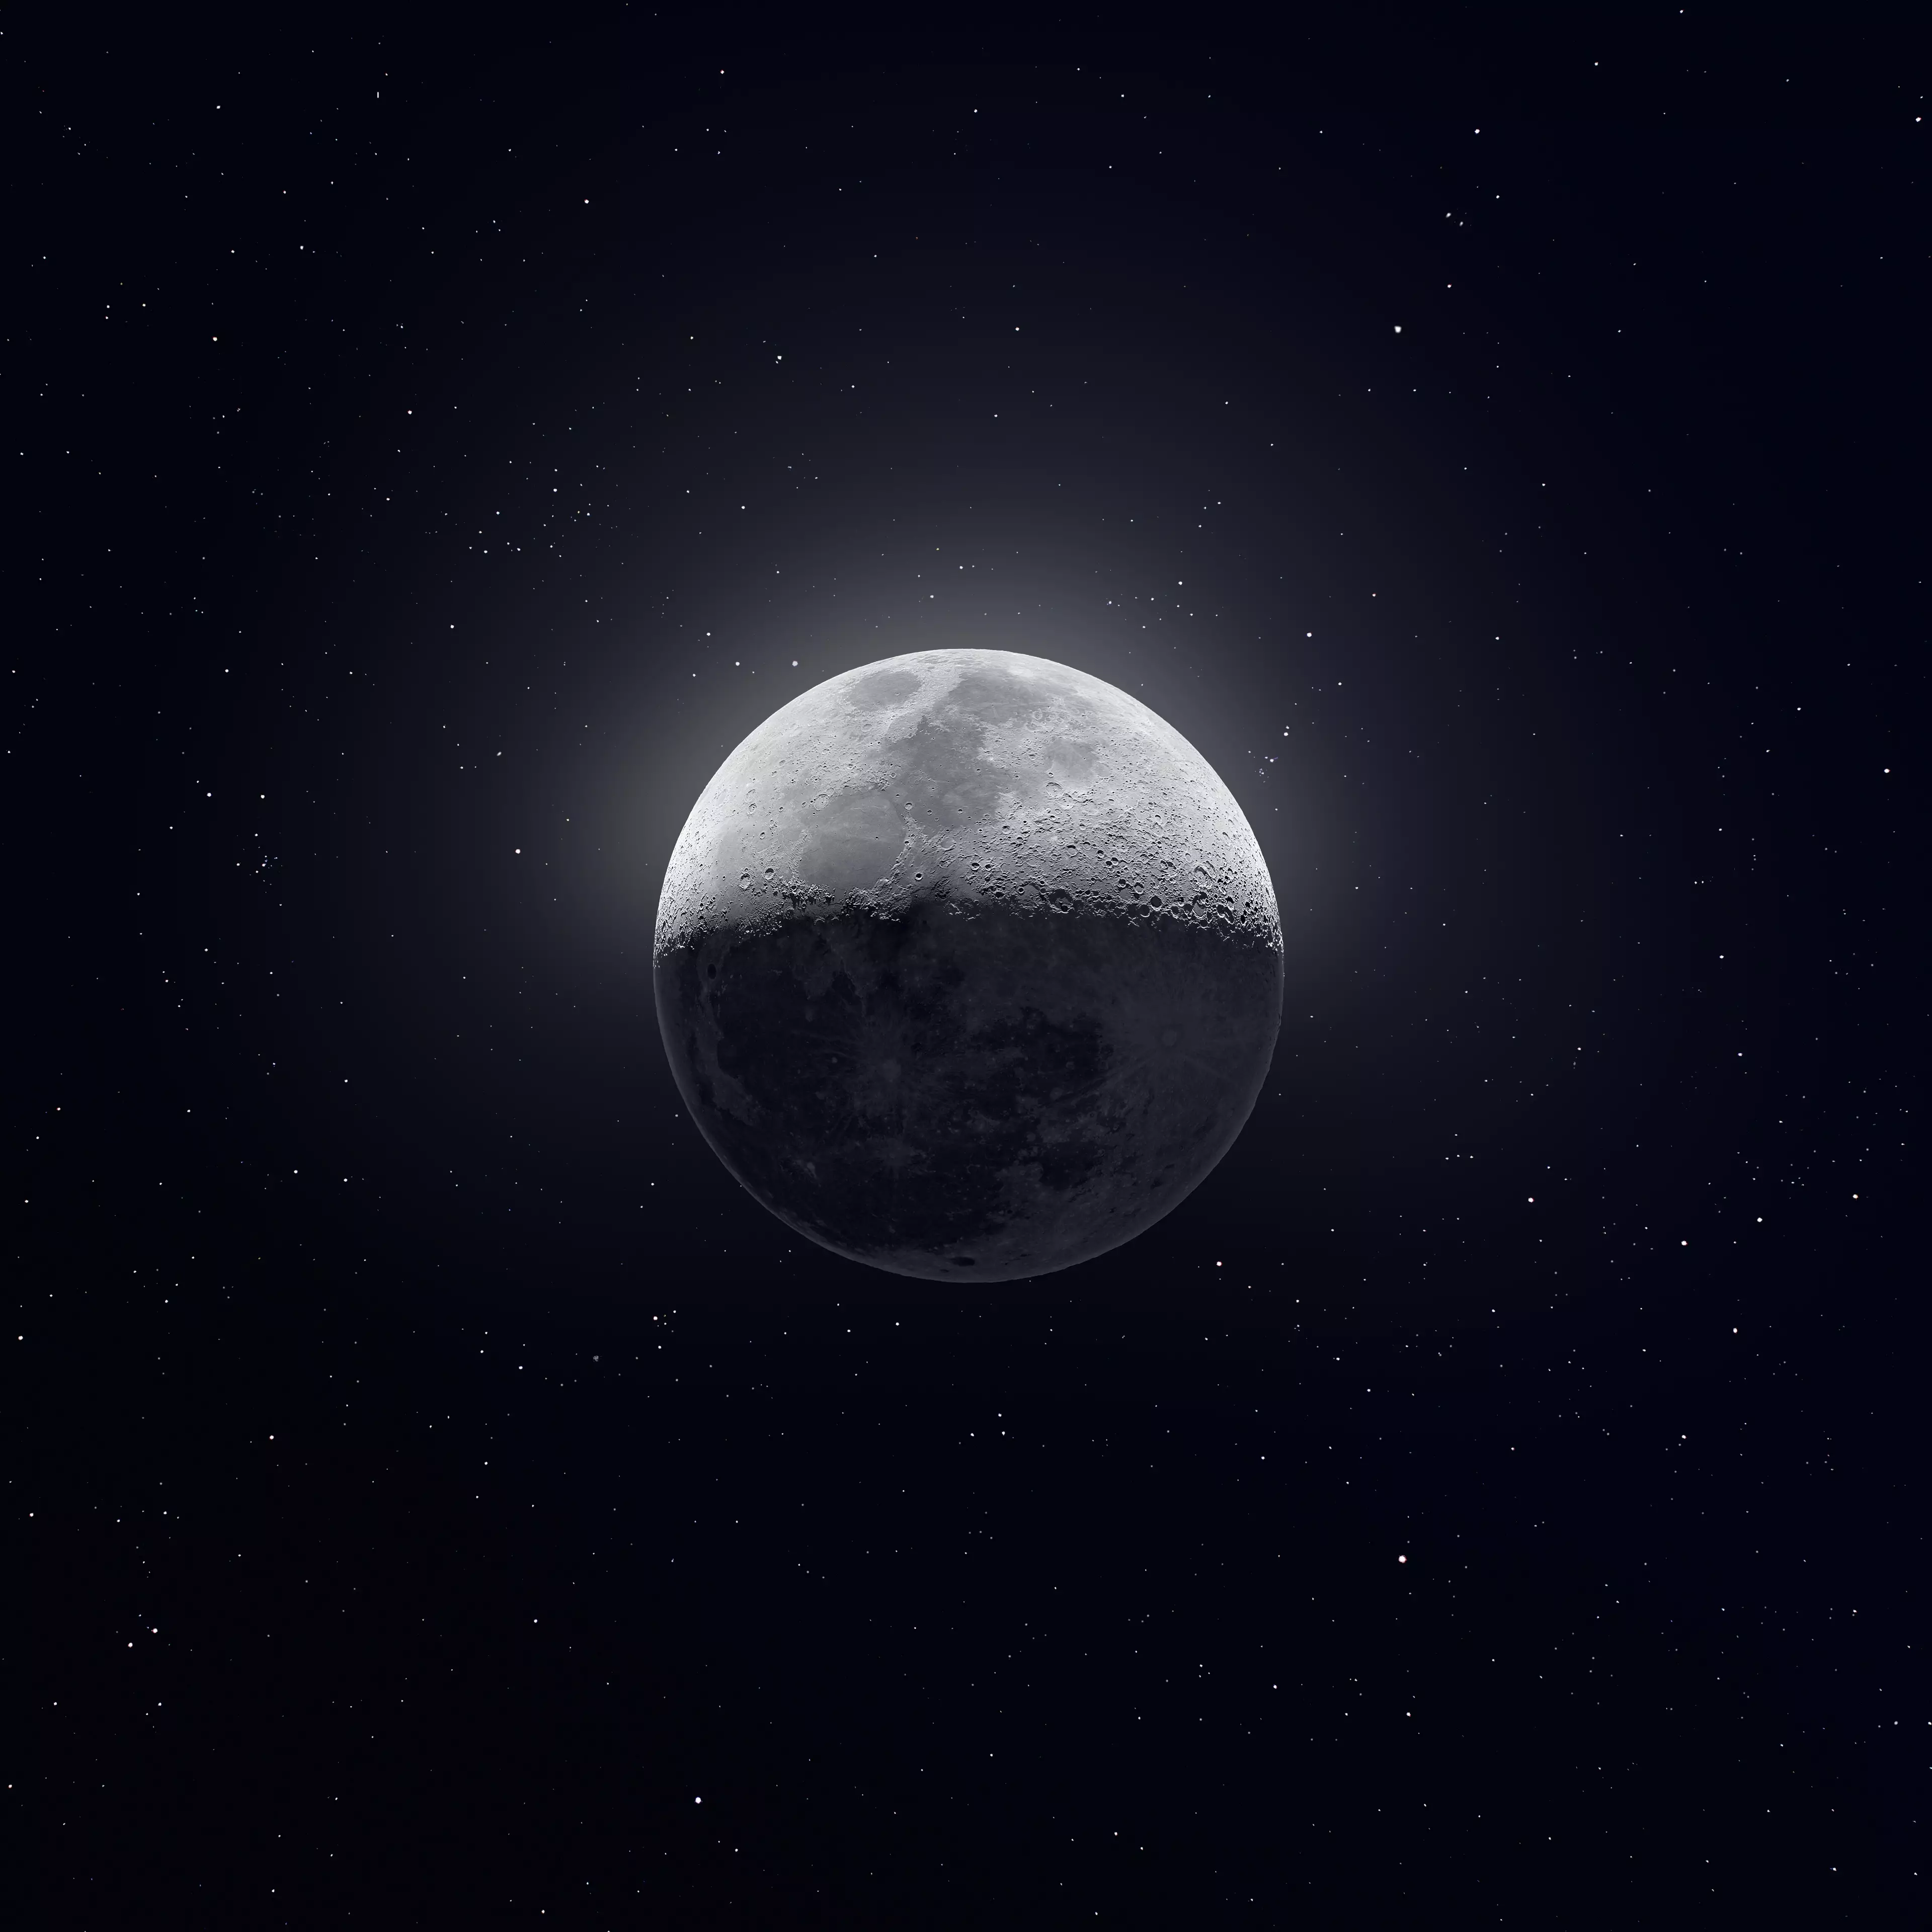 The moon, in all it's high definition glory.